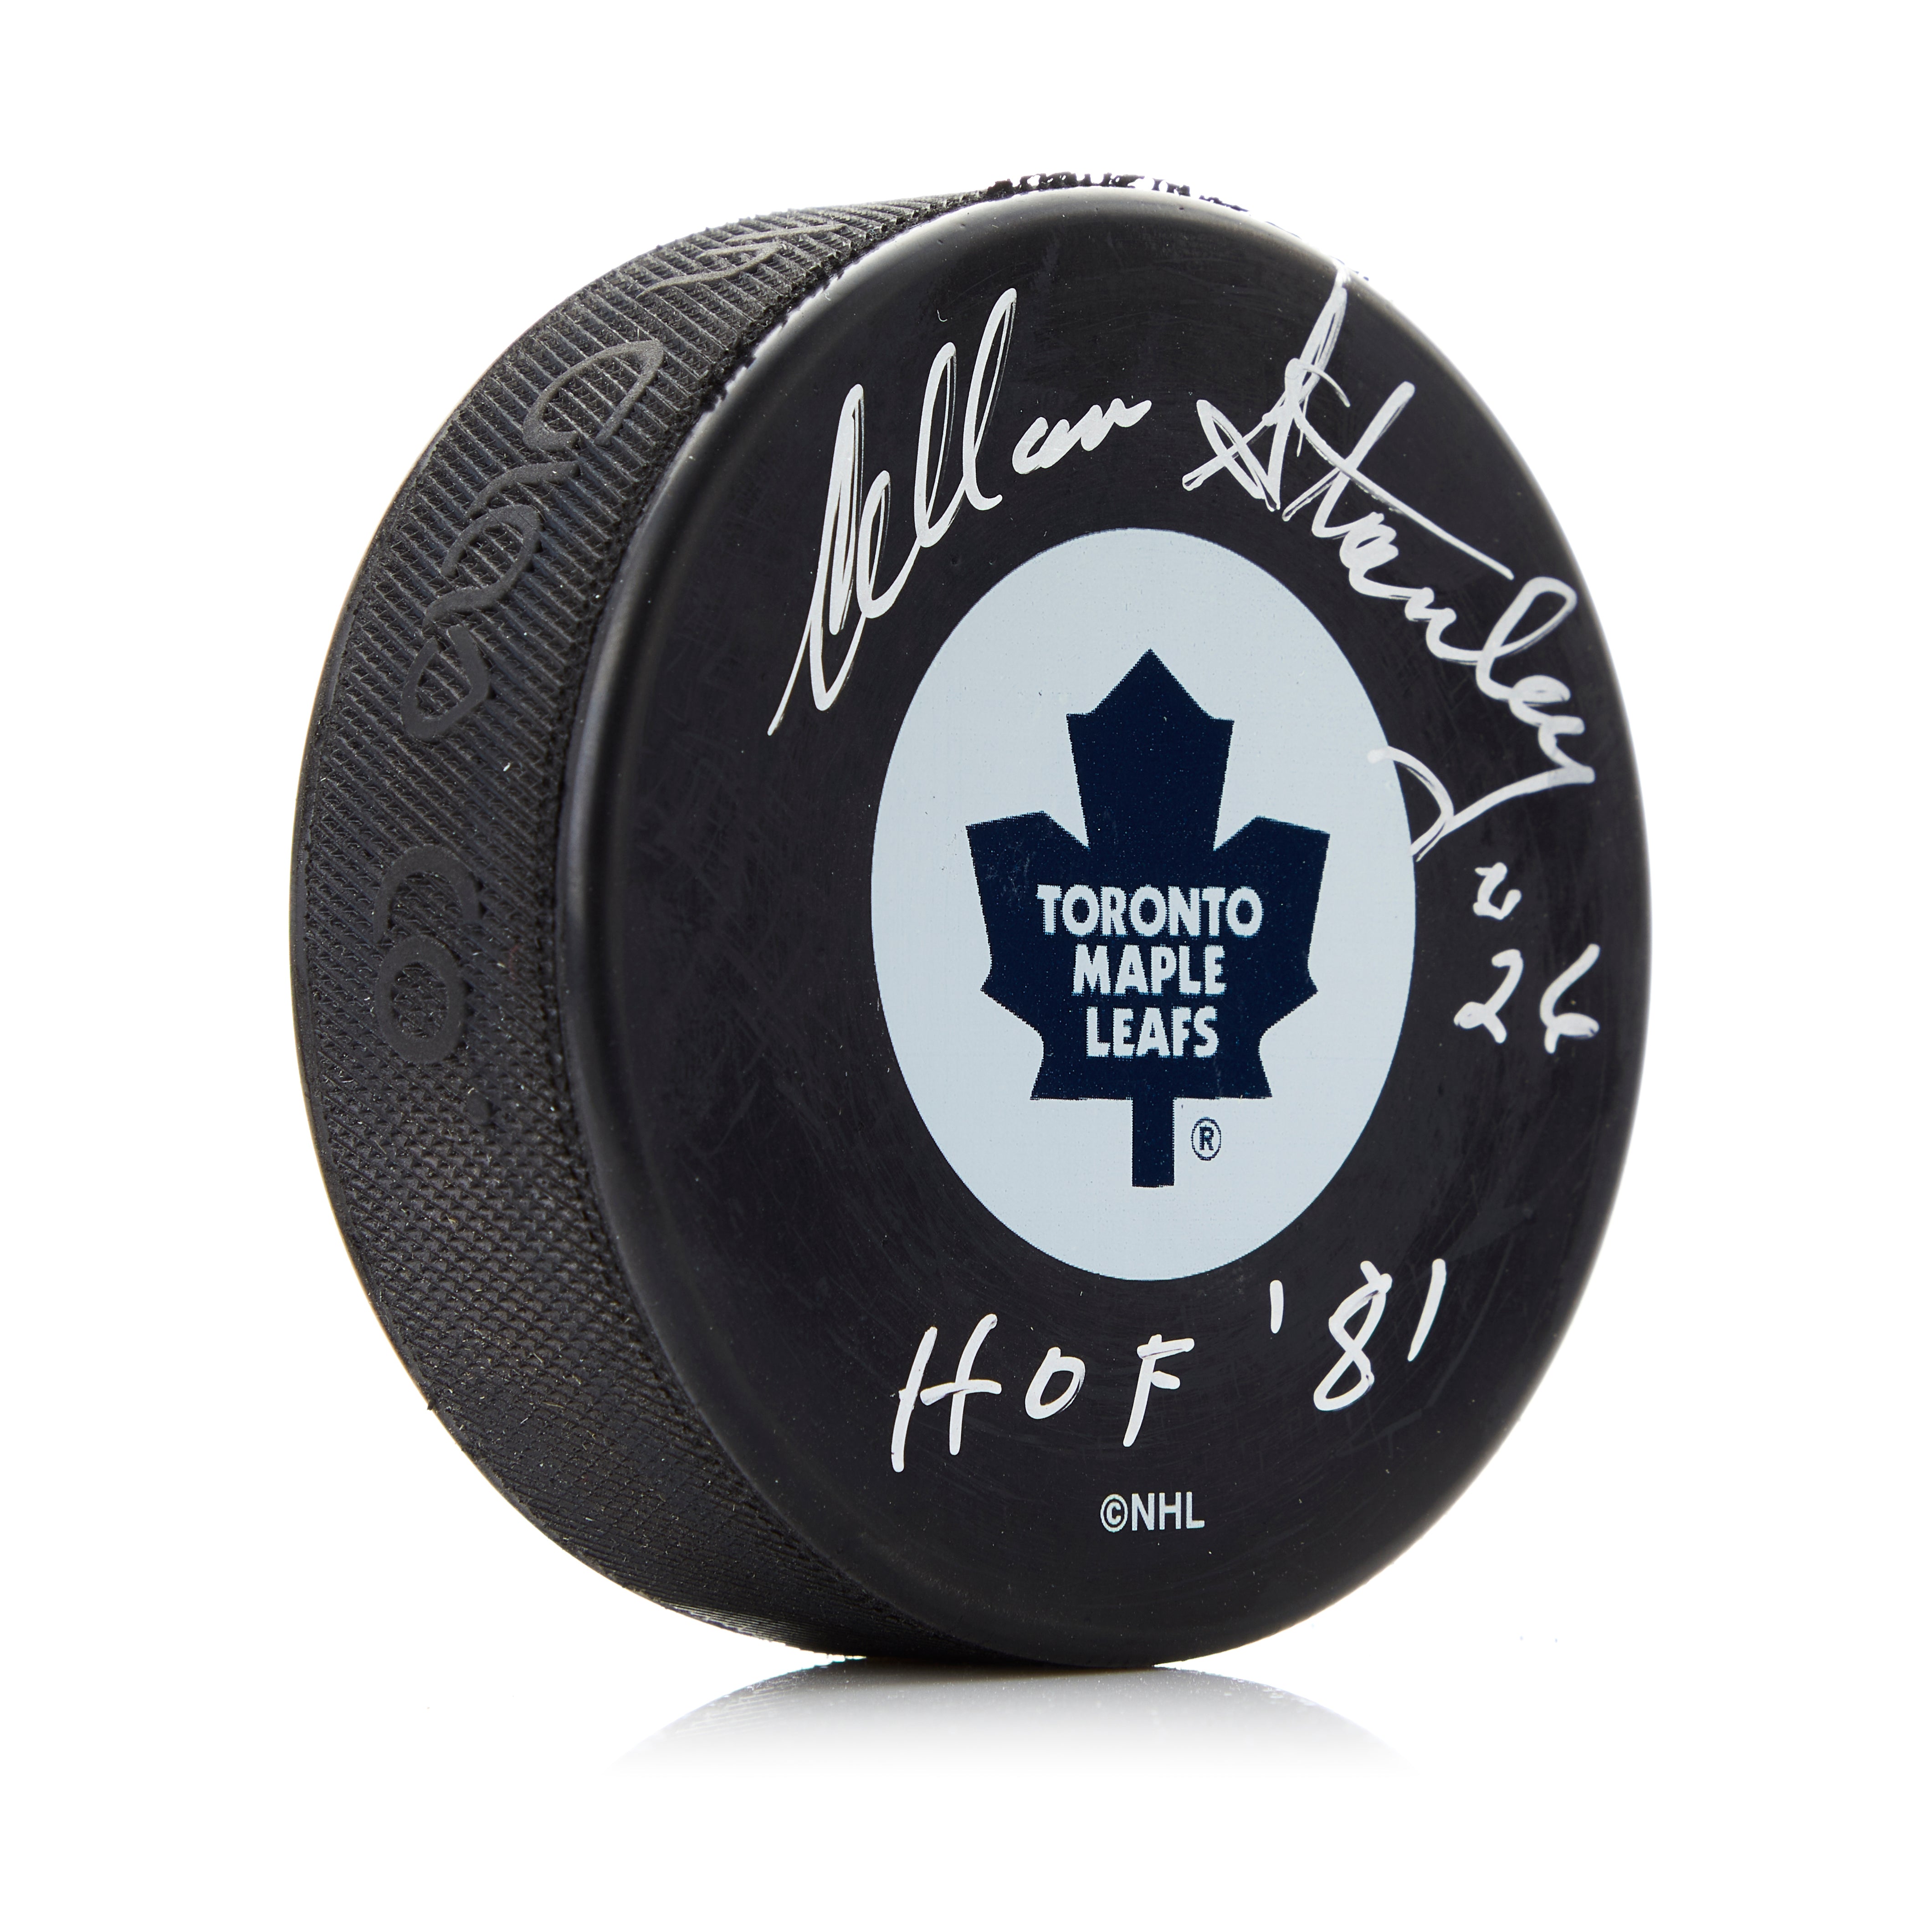 Allan Stanley Signed Toronto Maple Leafs Puck with HOF Note